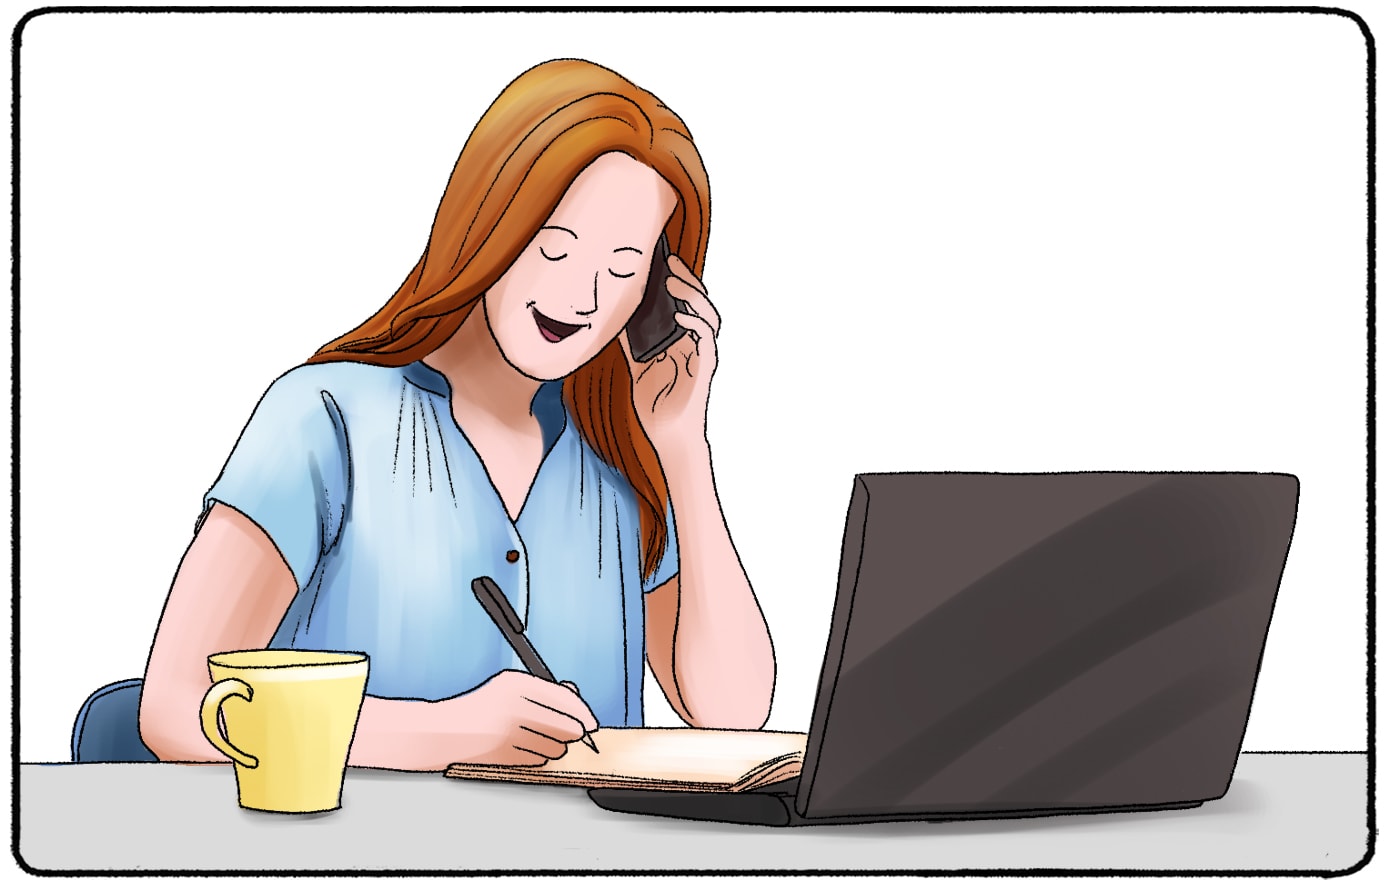 woman making a sales call